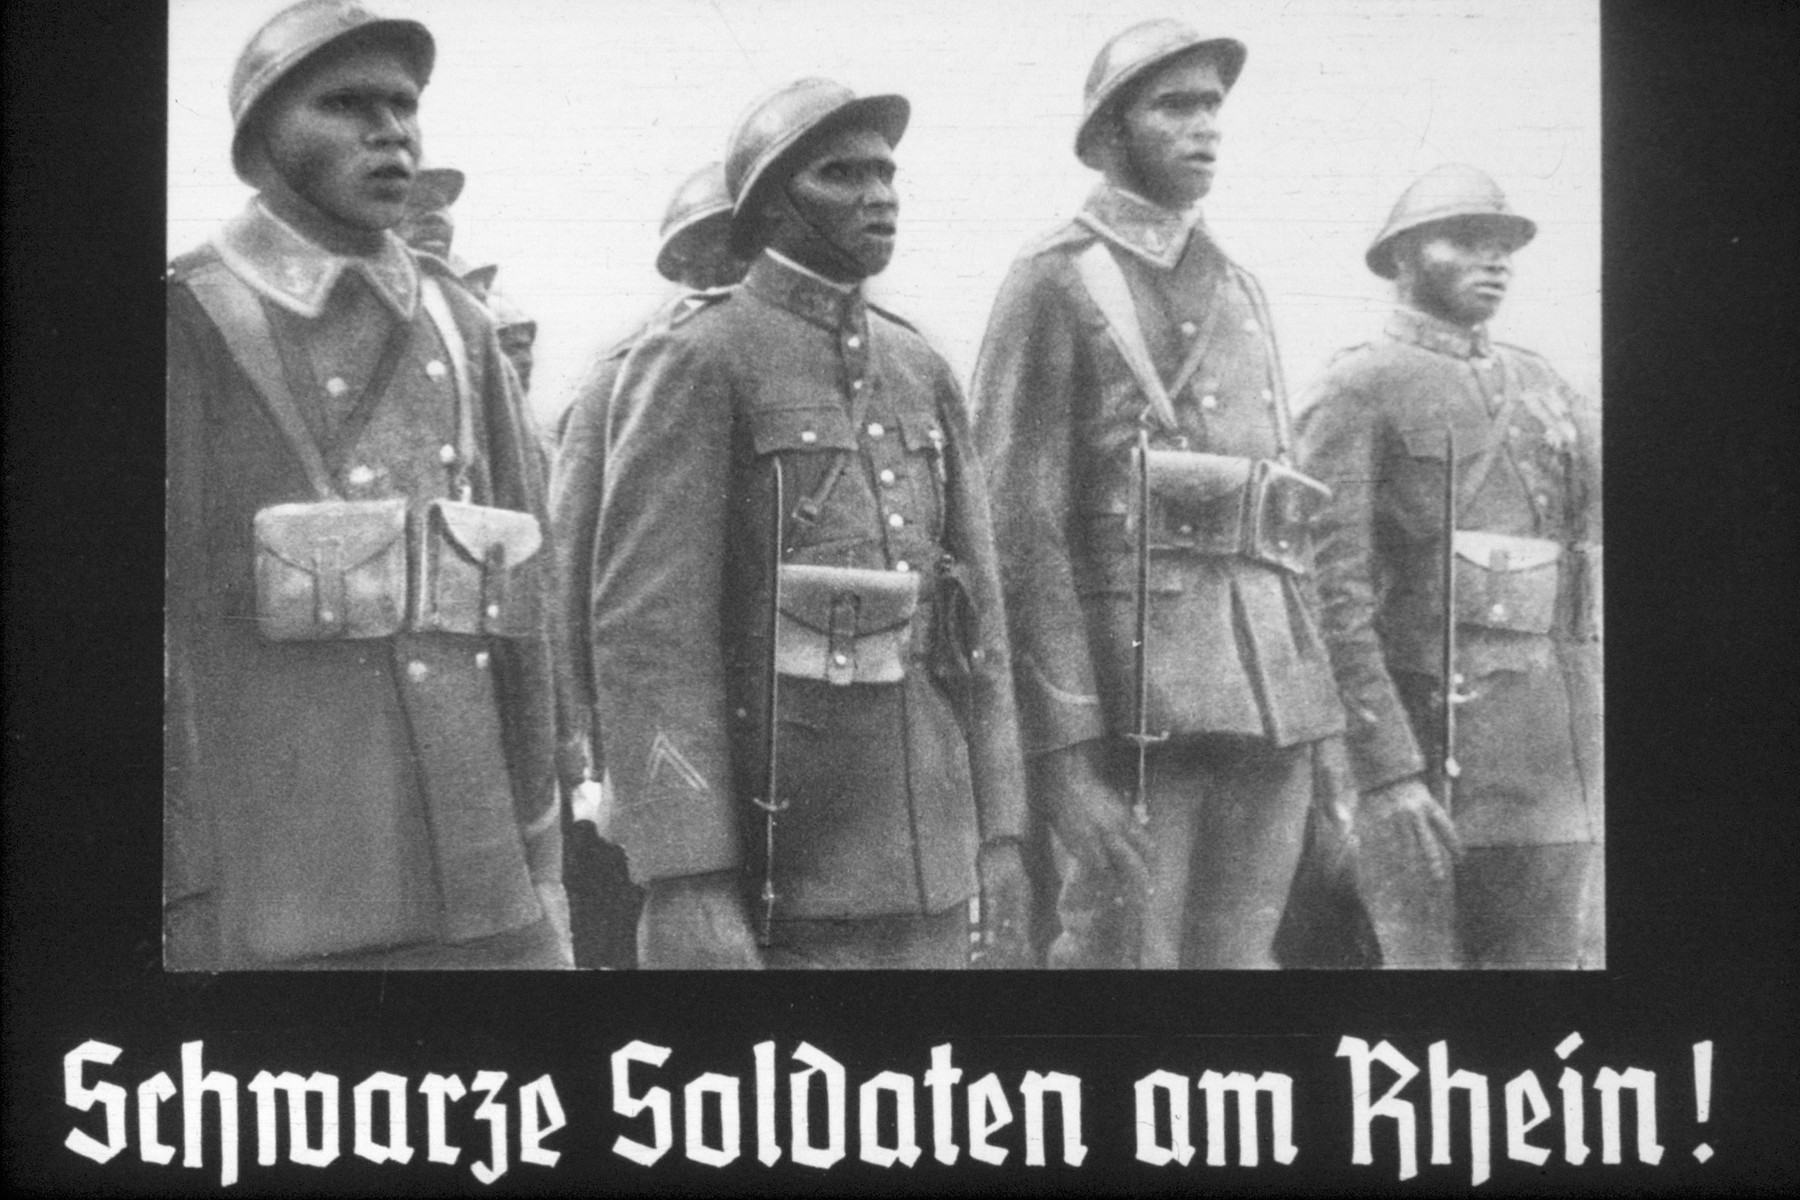 22th slide from a Hitler Youth slideshow about the aftermath of WWI, Versailles, how it was overcome and the rise of Nazism.

Schwarze Soldaten am Rhein!
//
Black soldiers on the Rhine!